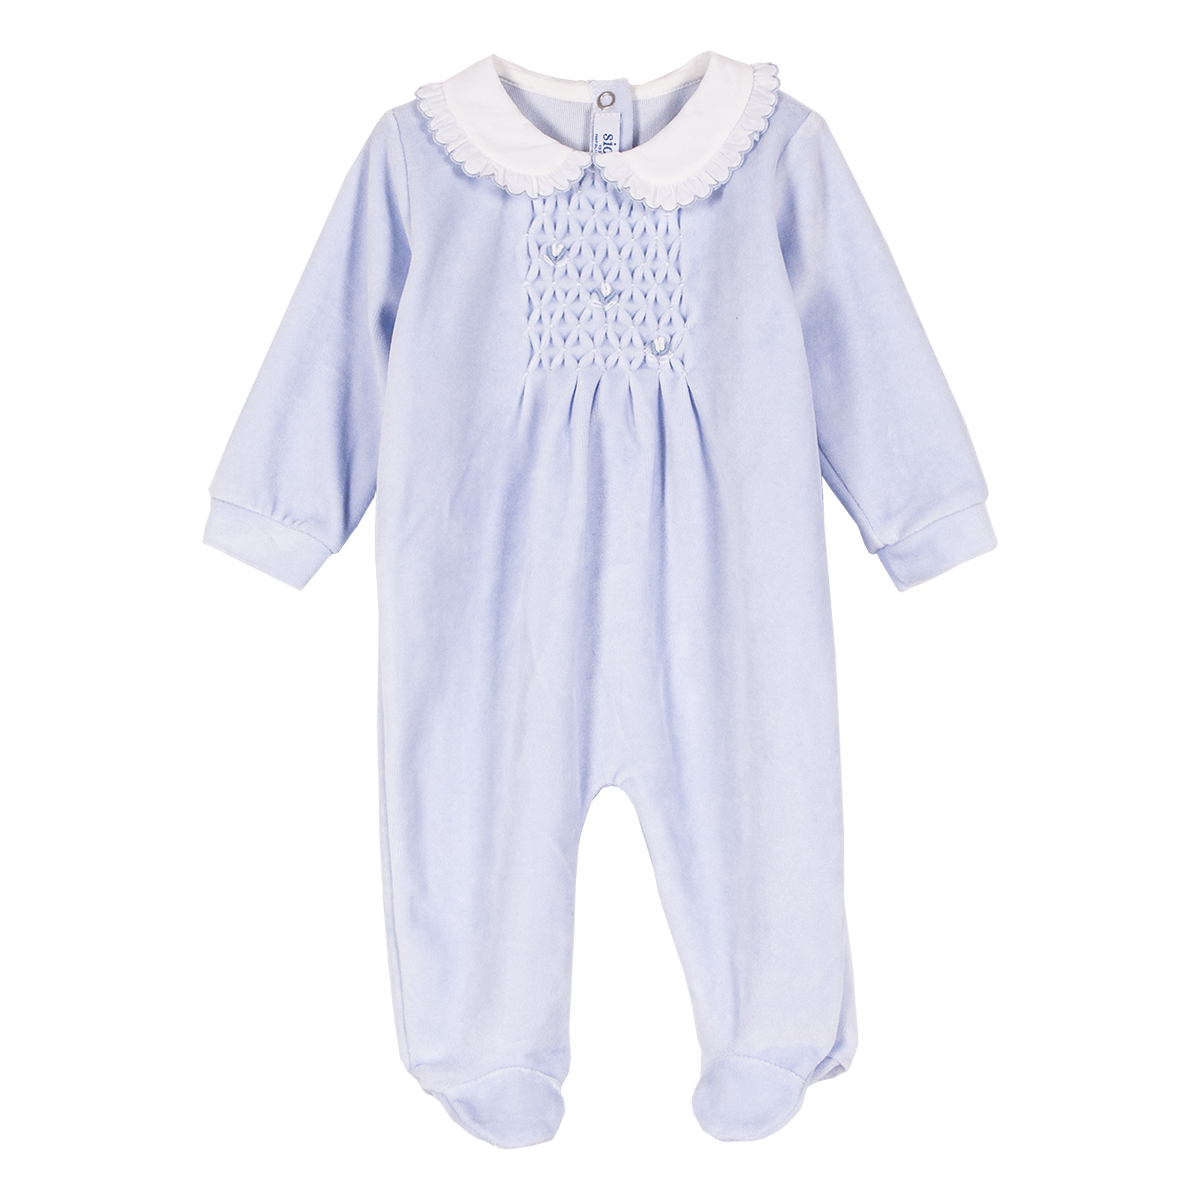 Siola Babies' Onesie With Front Embroidery In Cielo